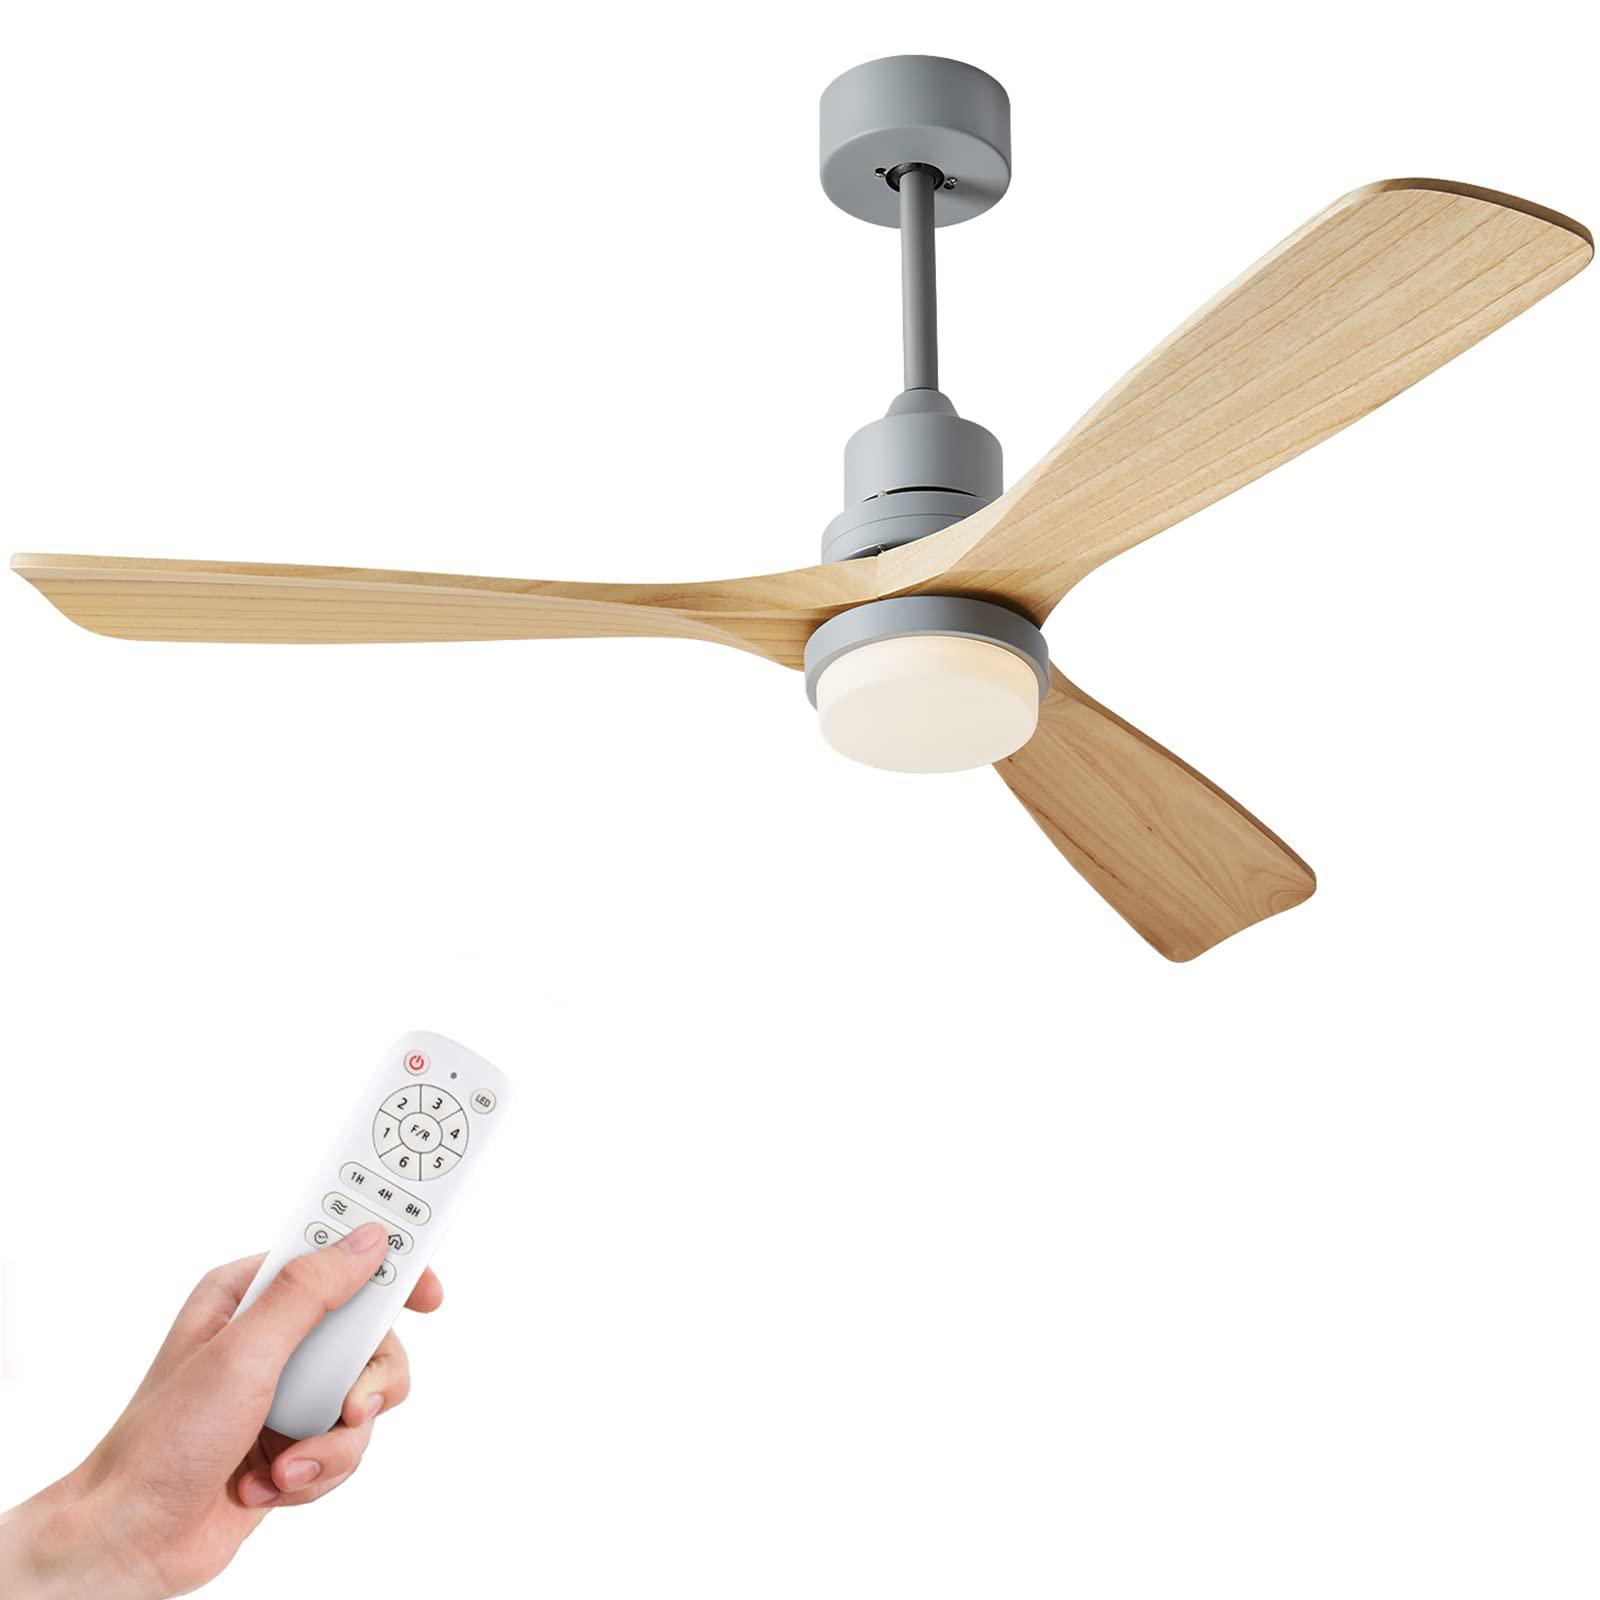 chriari ceiling fans with lights, 52" wood ceiling fan with remote control, 3 walnut blades, 6 speeds timing reversible indoo